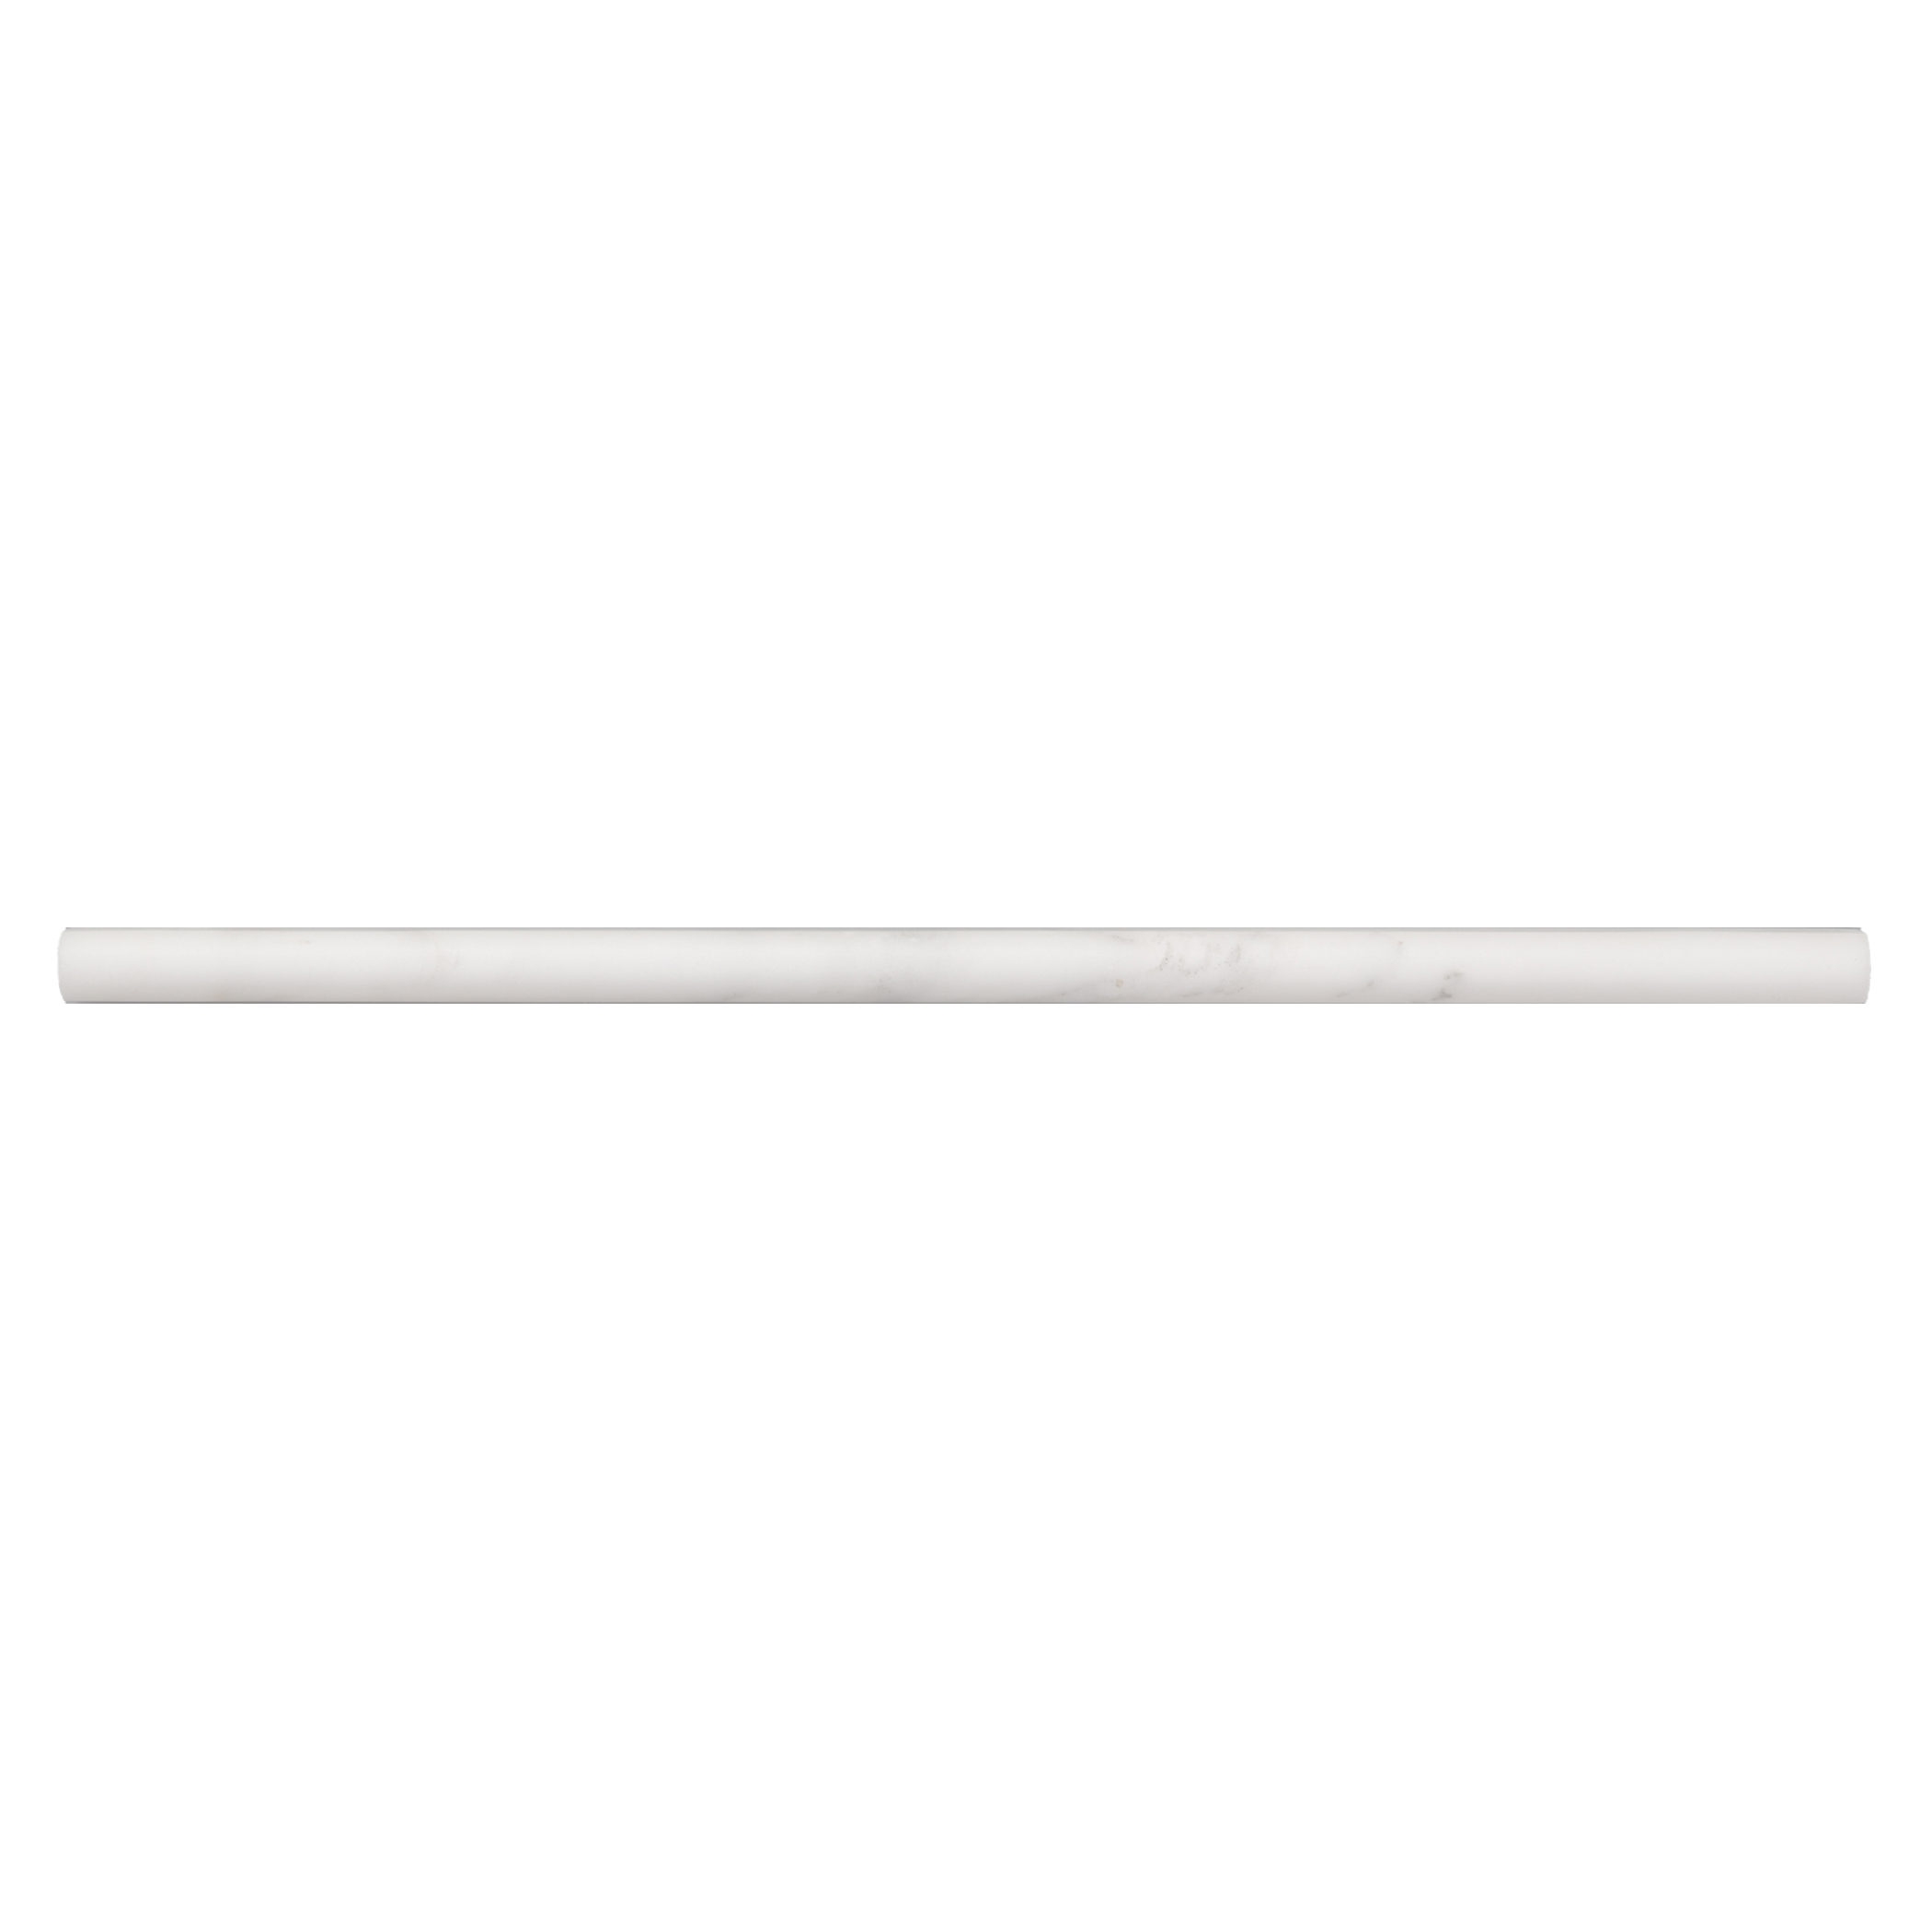 Bianco Bello Marble Premium 9/16" x 12" x 3/4" Pencil Liner - Polished or Honed  - DW TILE & STONE - Atlanta Marble Natural Stone Wholesale Stone Supplier